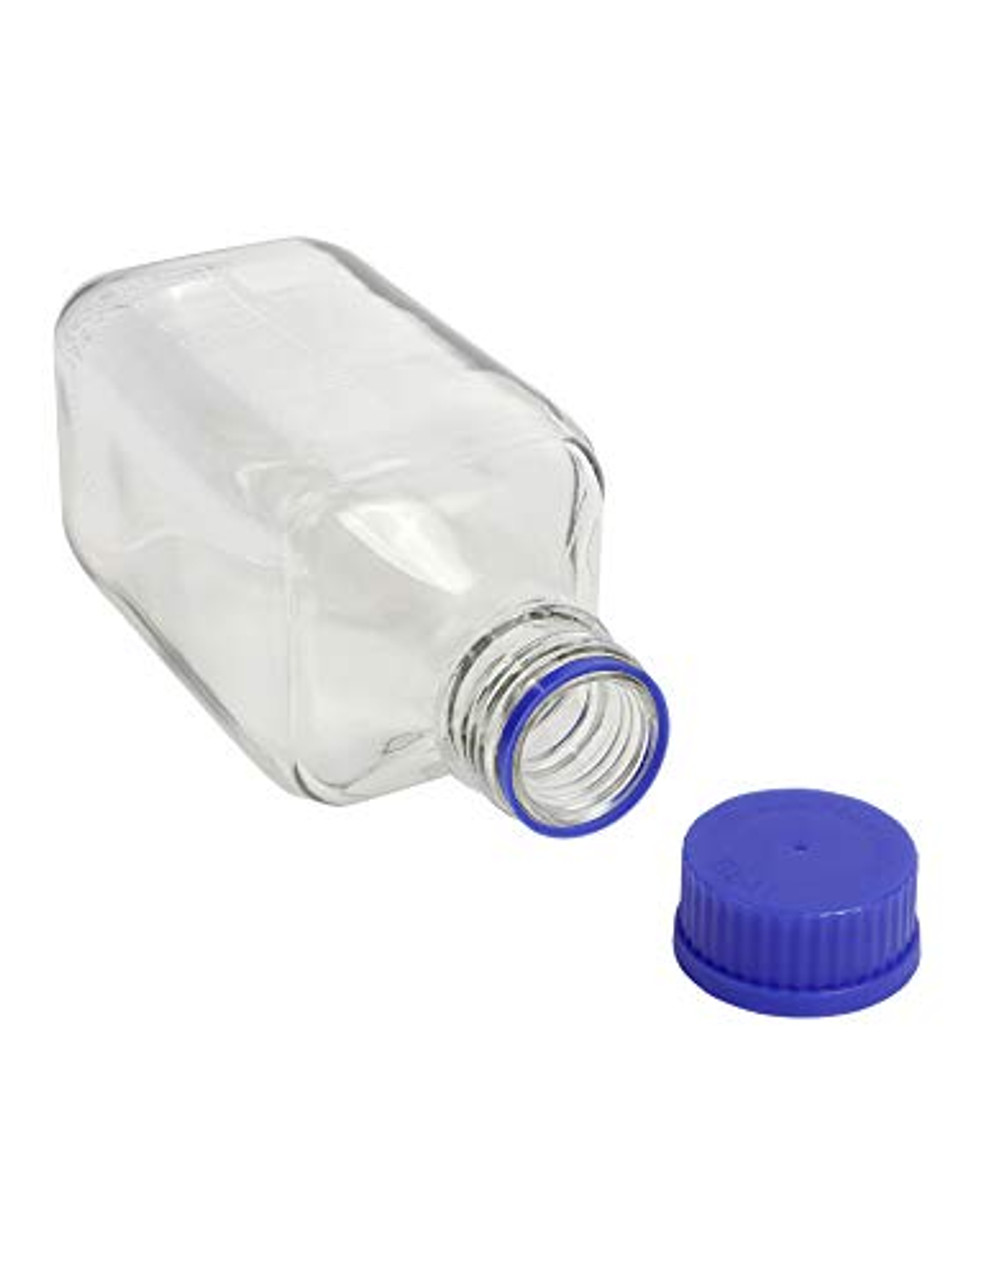 PYREX Square Media/Solution Bottles and Caps